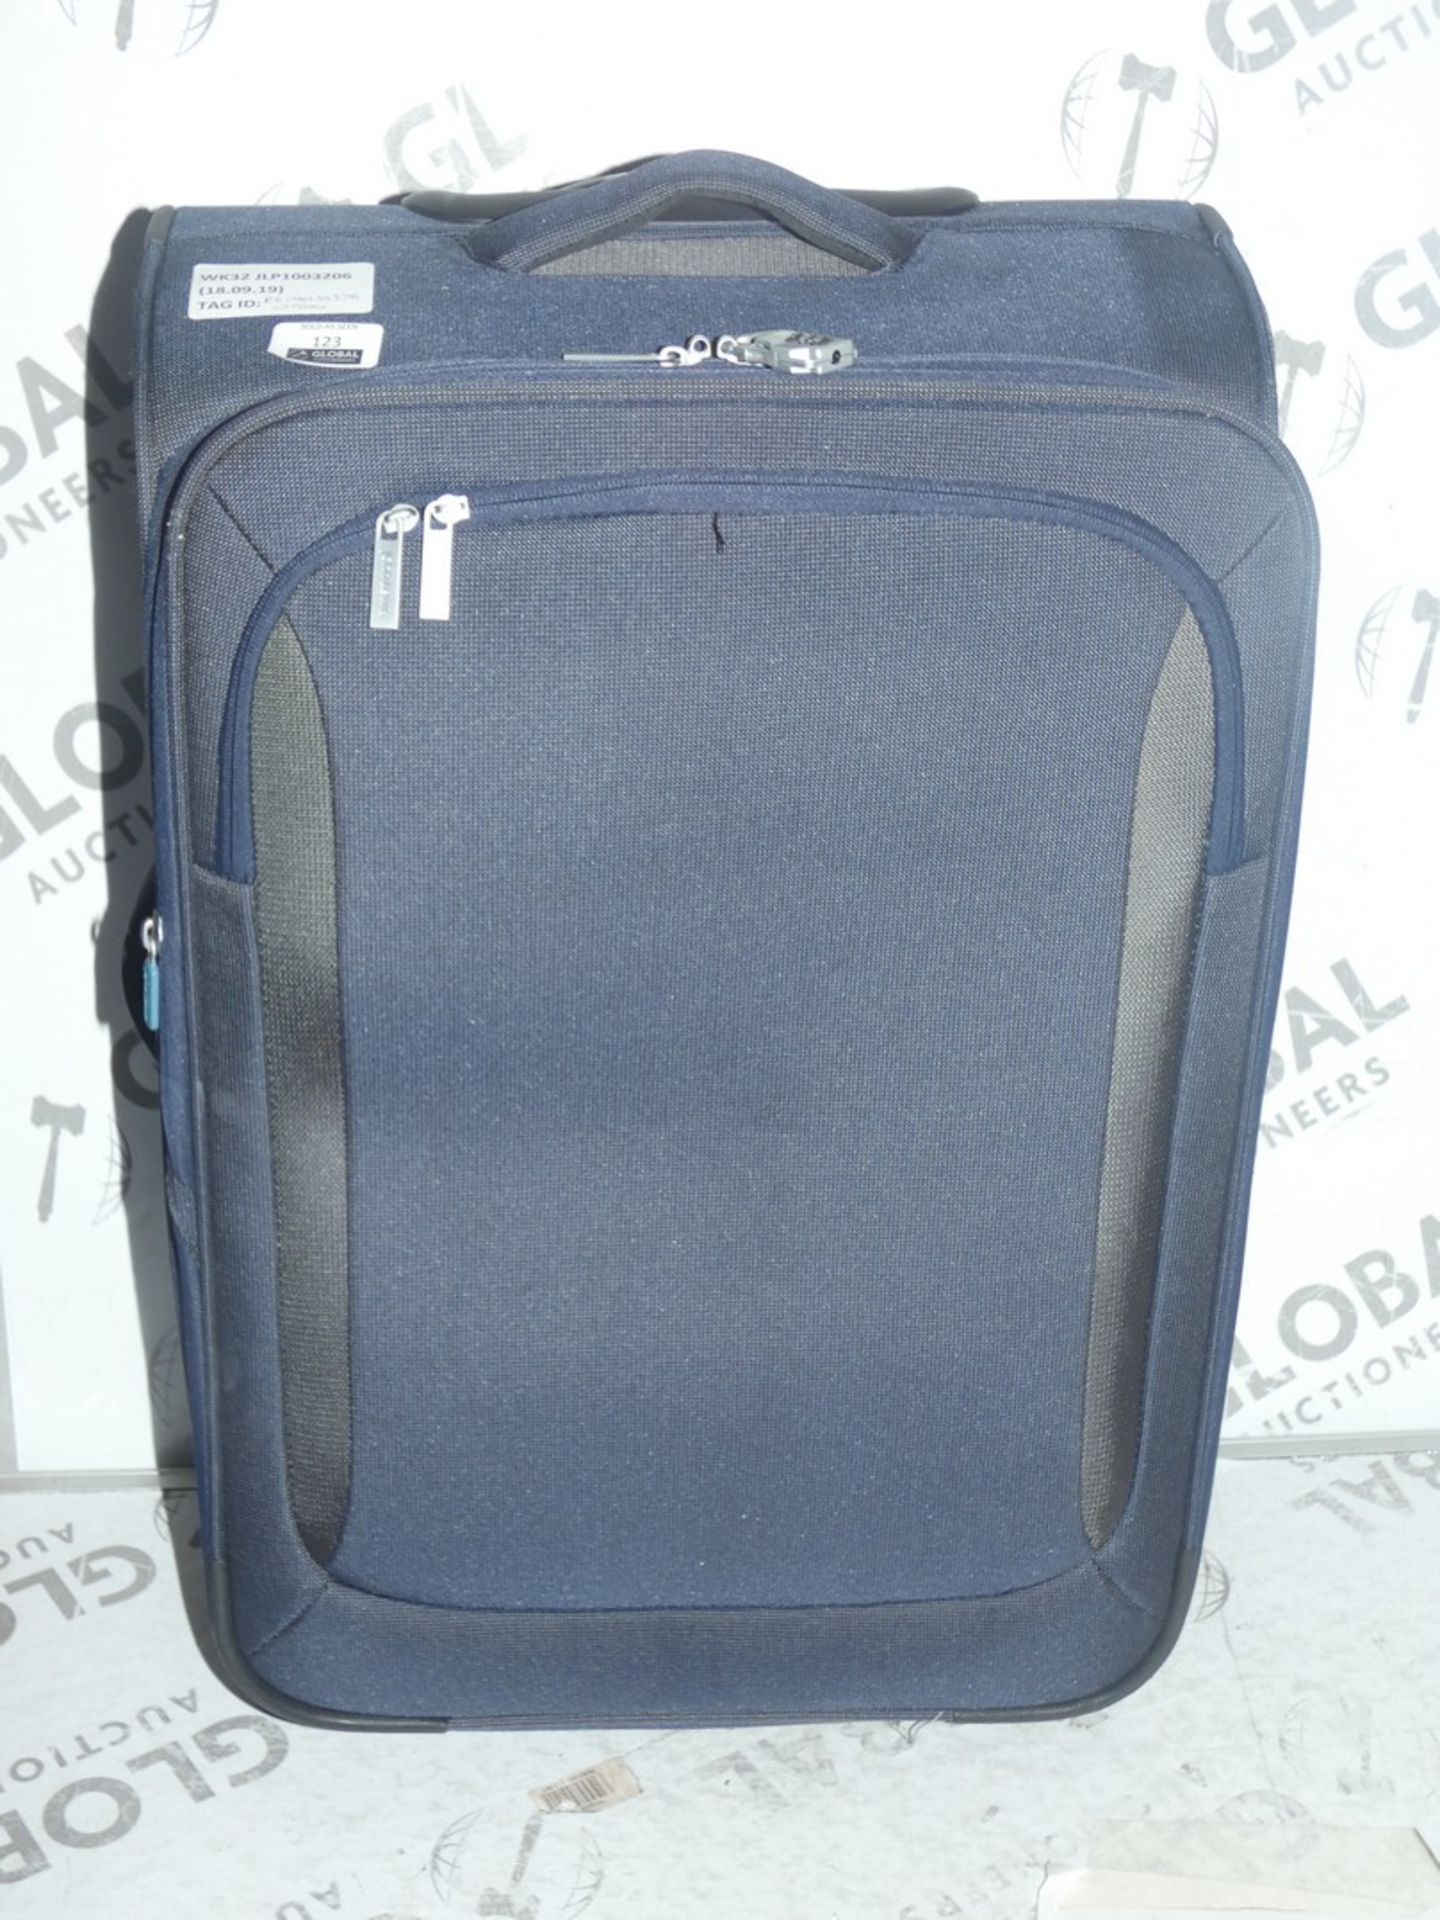 John Lewis and Partners Navy Blue 2 Wheel Cabin Bag RRP £70 (2749395) (Public Viewing and Appraisals